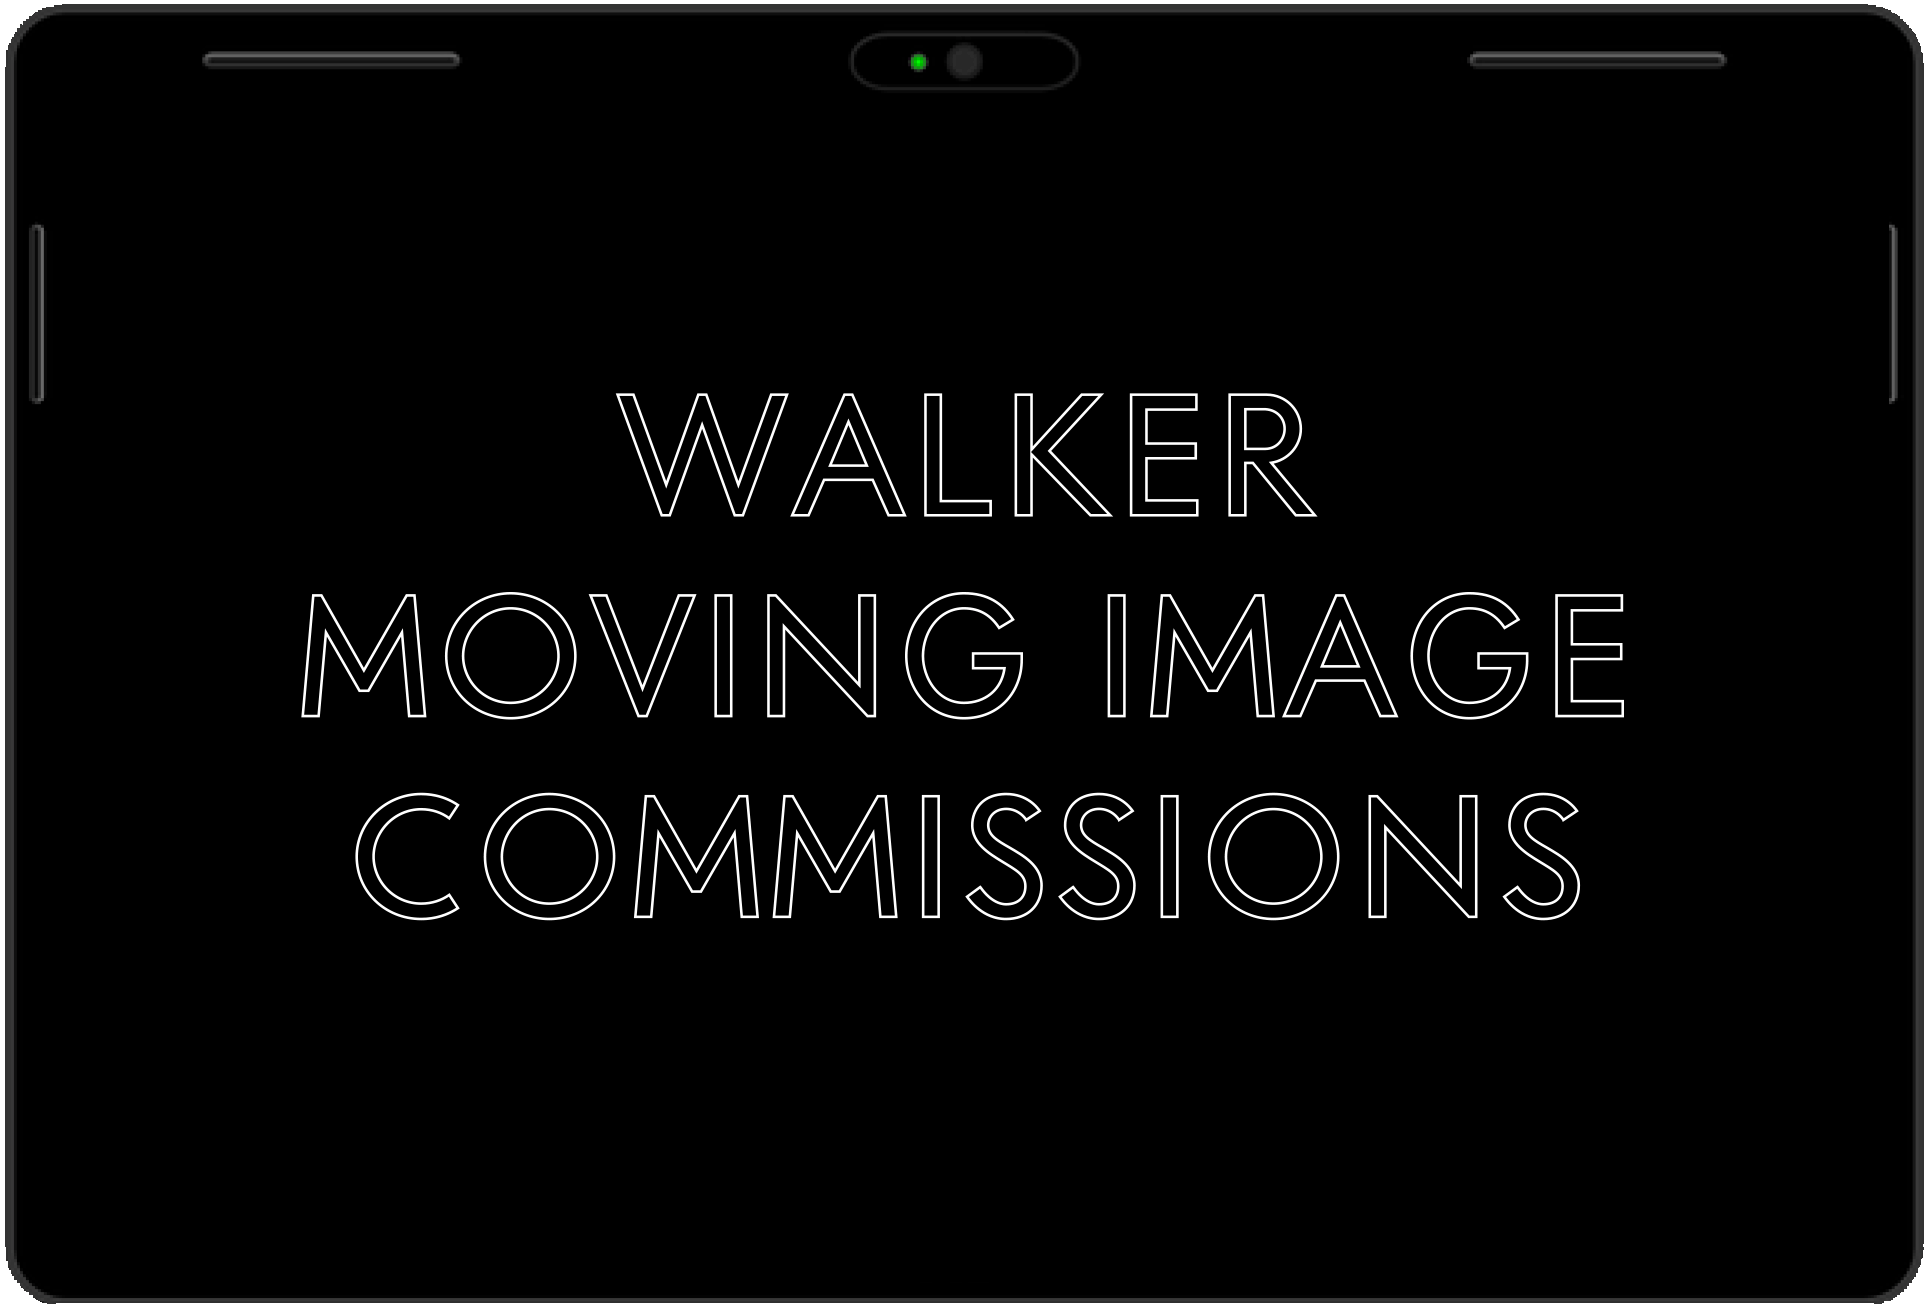 Moving Image Commissions